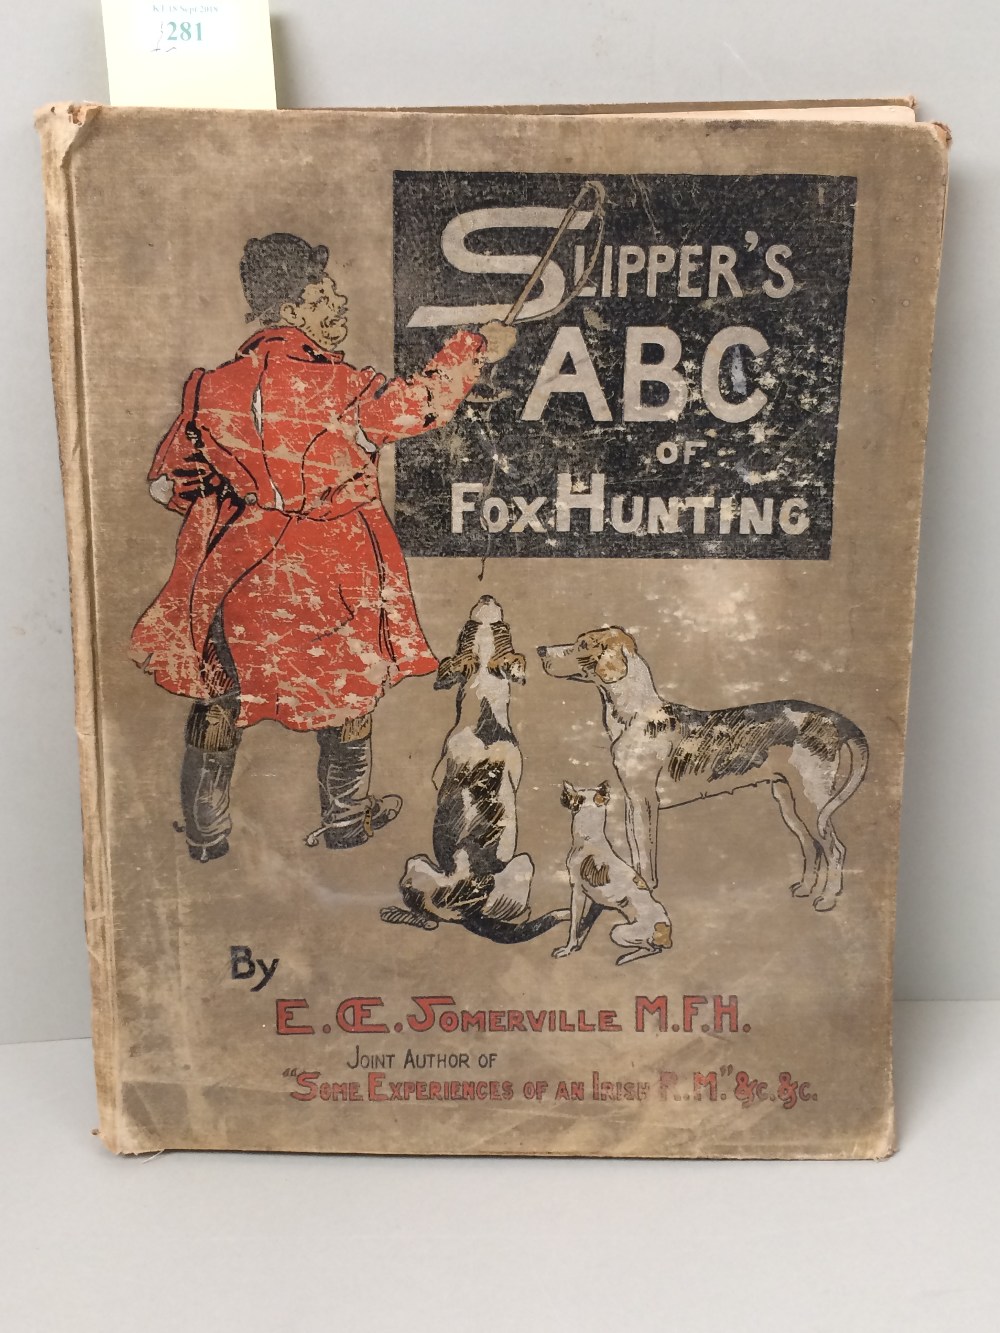 E Somerville 'Slippers ABC of Fox Hunting' (please remember to check condition of lots before